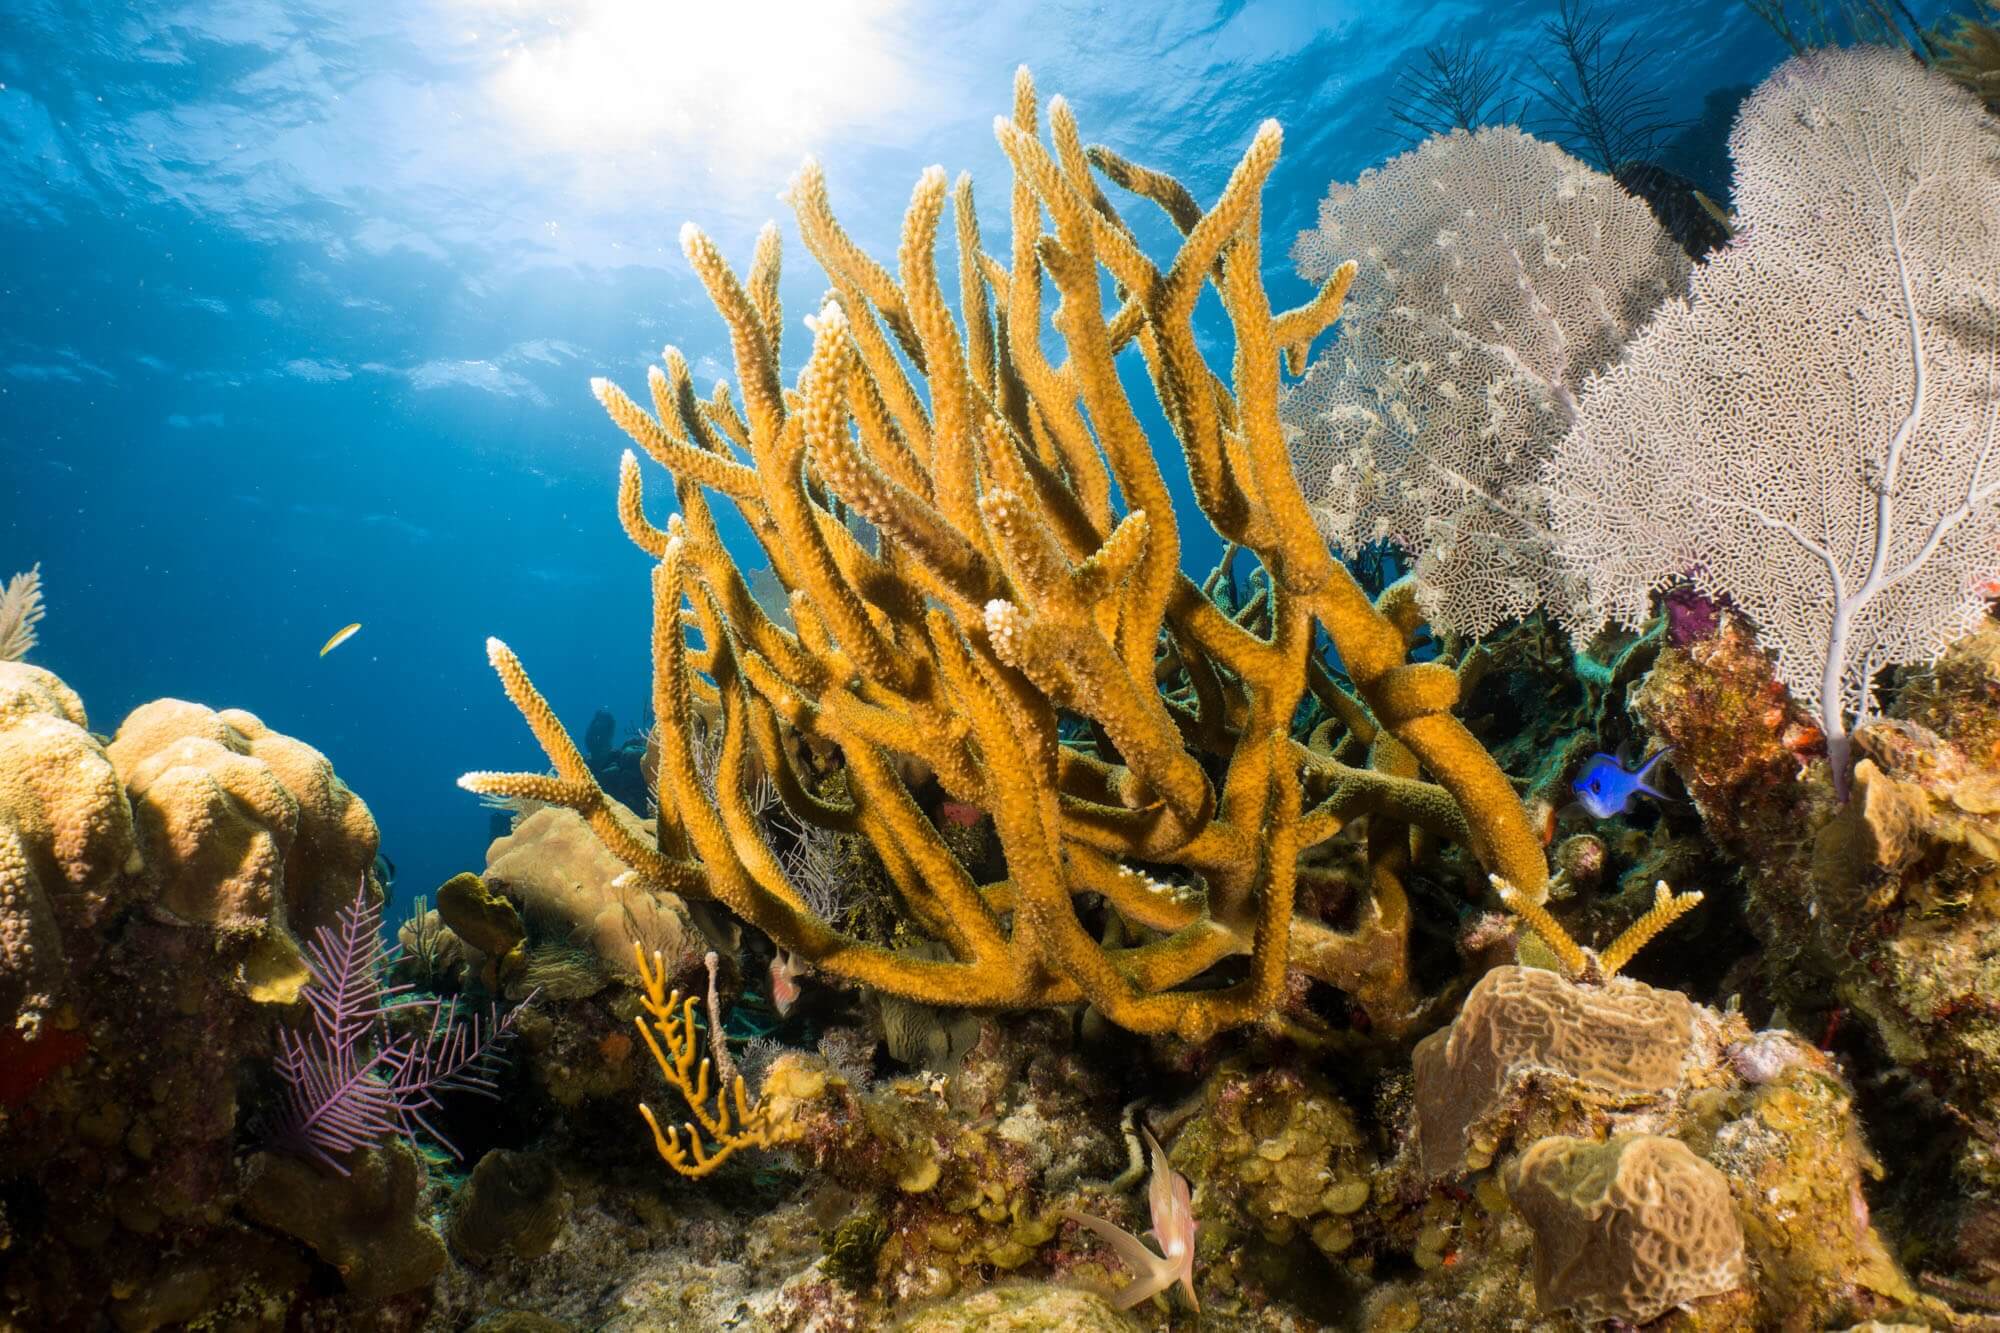 The coral formations in Belize were some of the most pristine we've seen